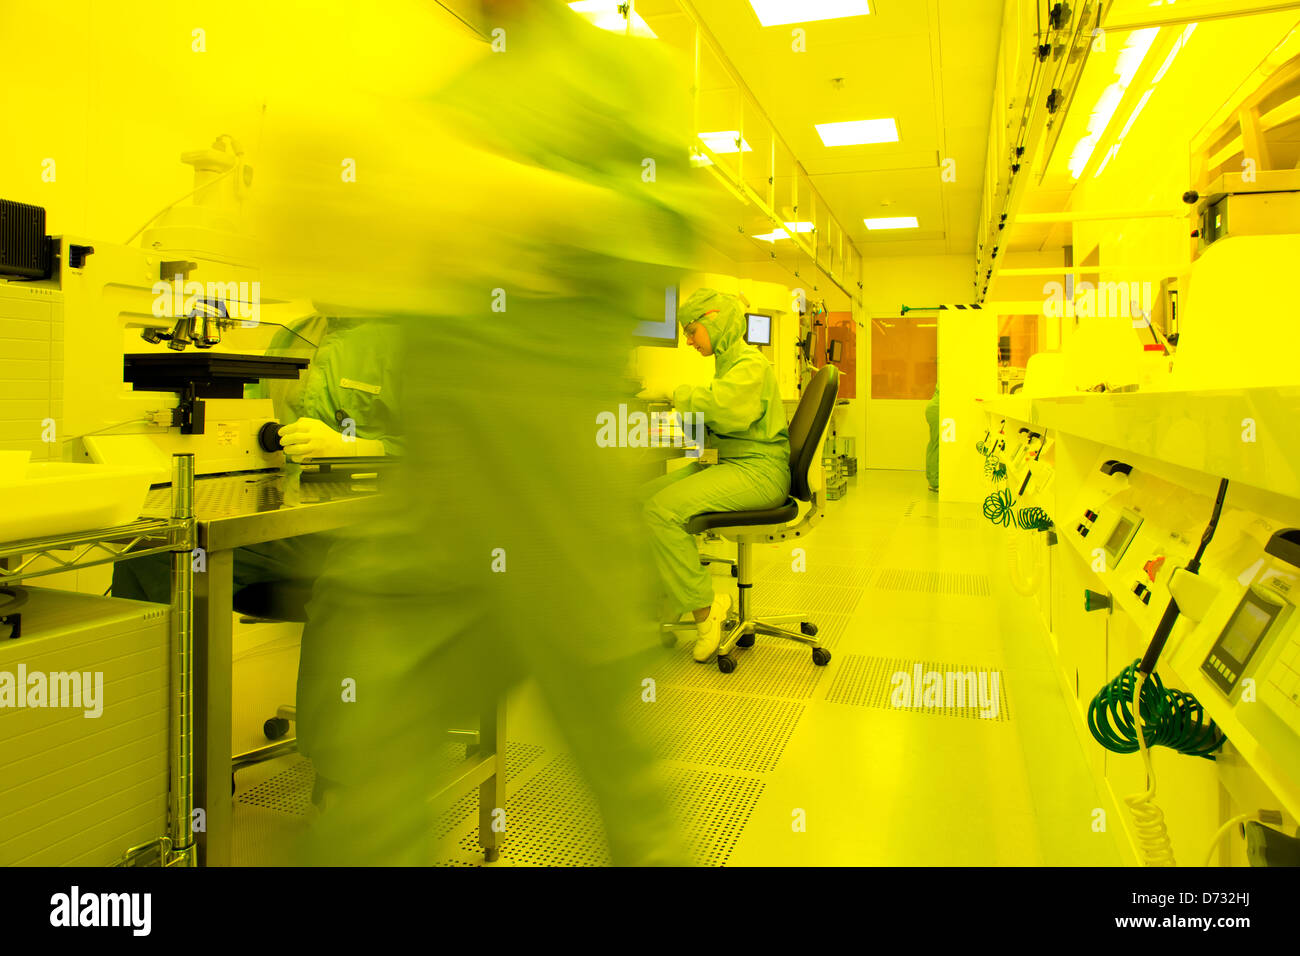 Dortmund, Germany, scientists at iX-factory work in the clean room Stock Photo